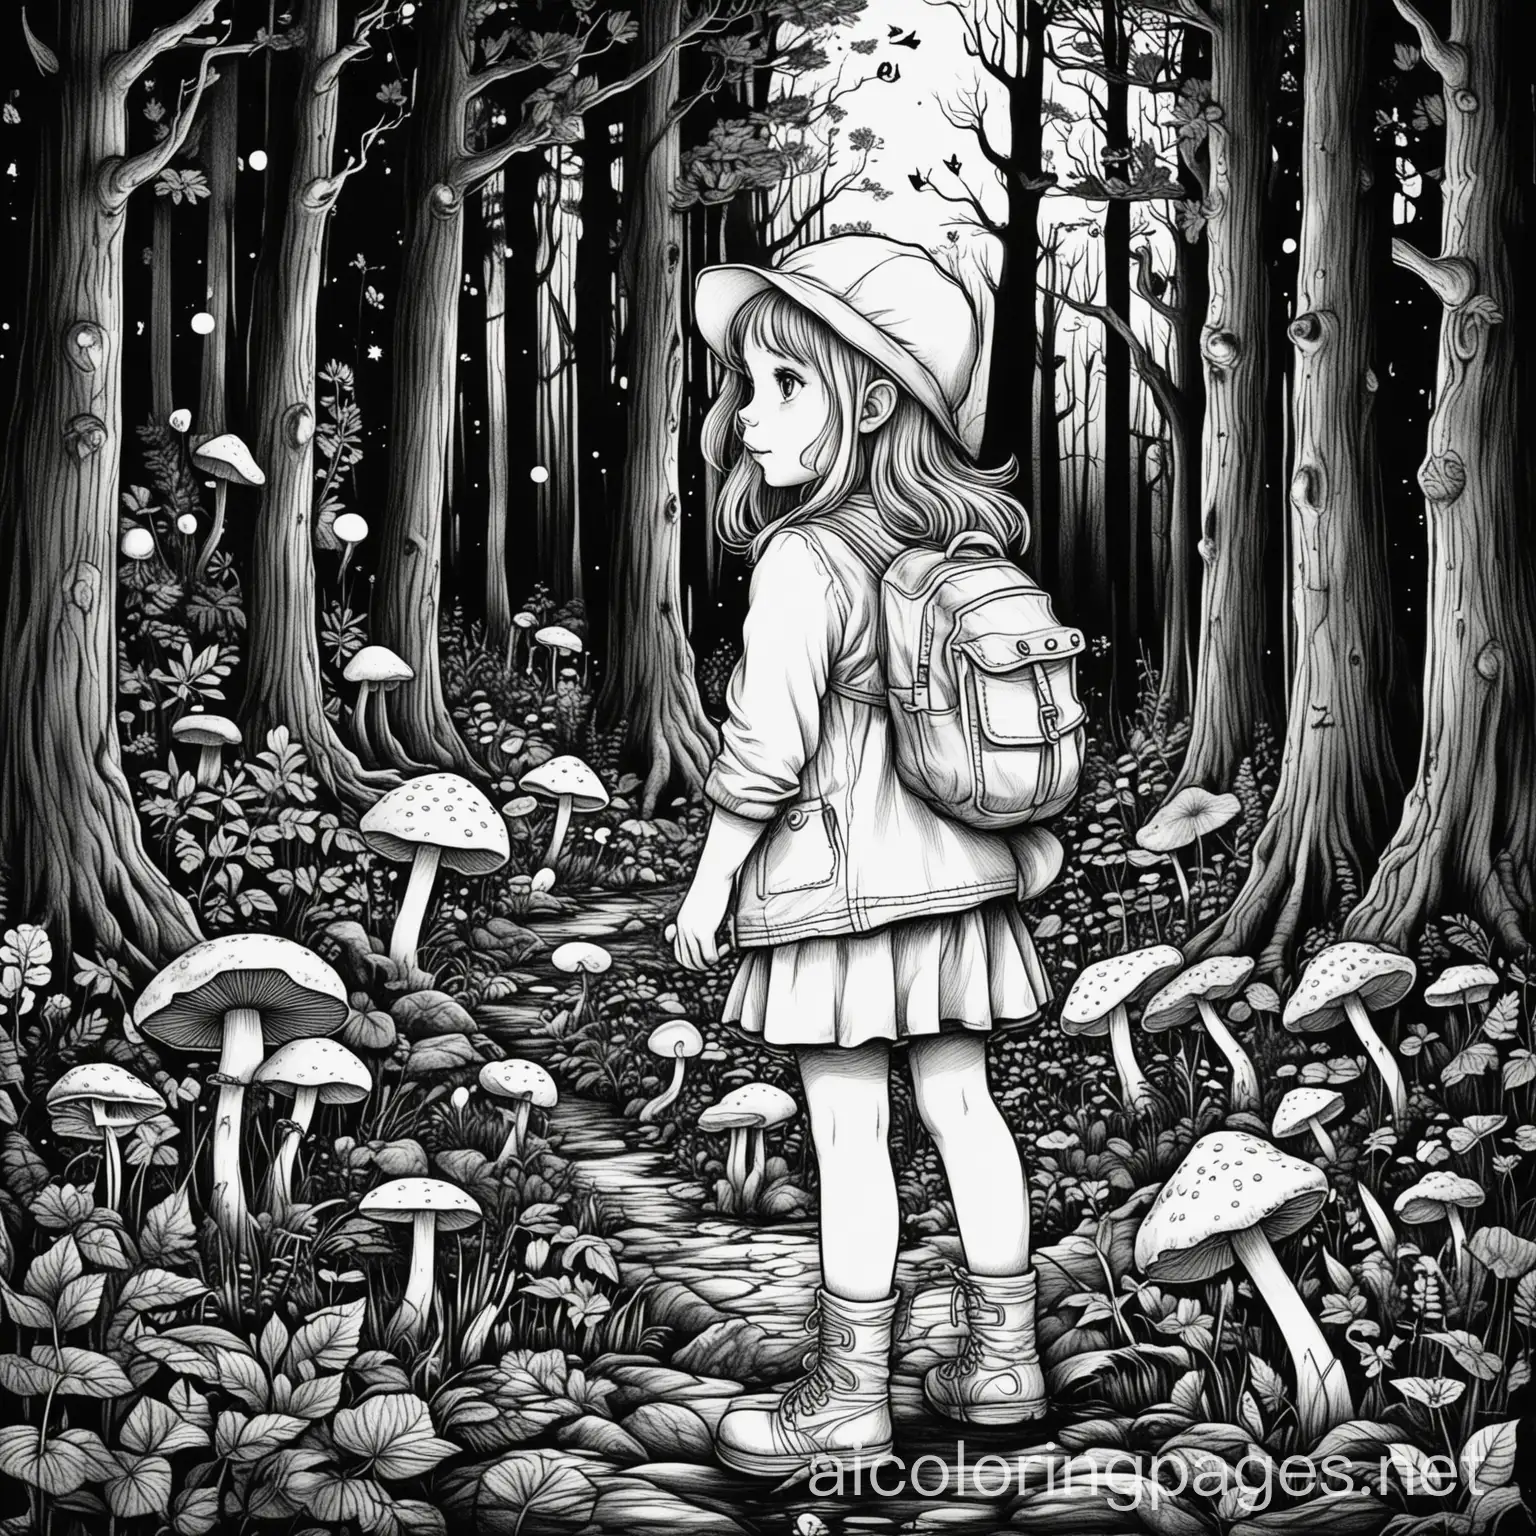 girl in forest at night looking for mushrooms, Coloring Page, black and white, line art, white background, Simplicity, Ample White Space. The background of the coloring page is plain white to make it easy for young children to color within the lines. The outlines of all the subjects are easy to distinguish, making it simple for kids to color without too much difficulty